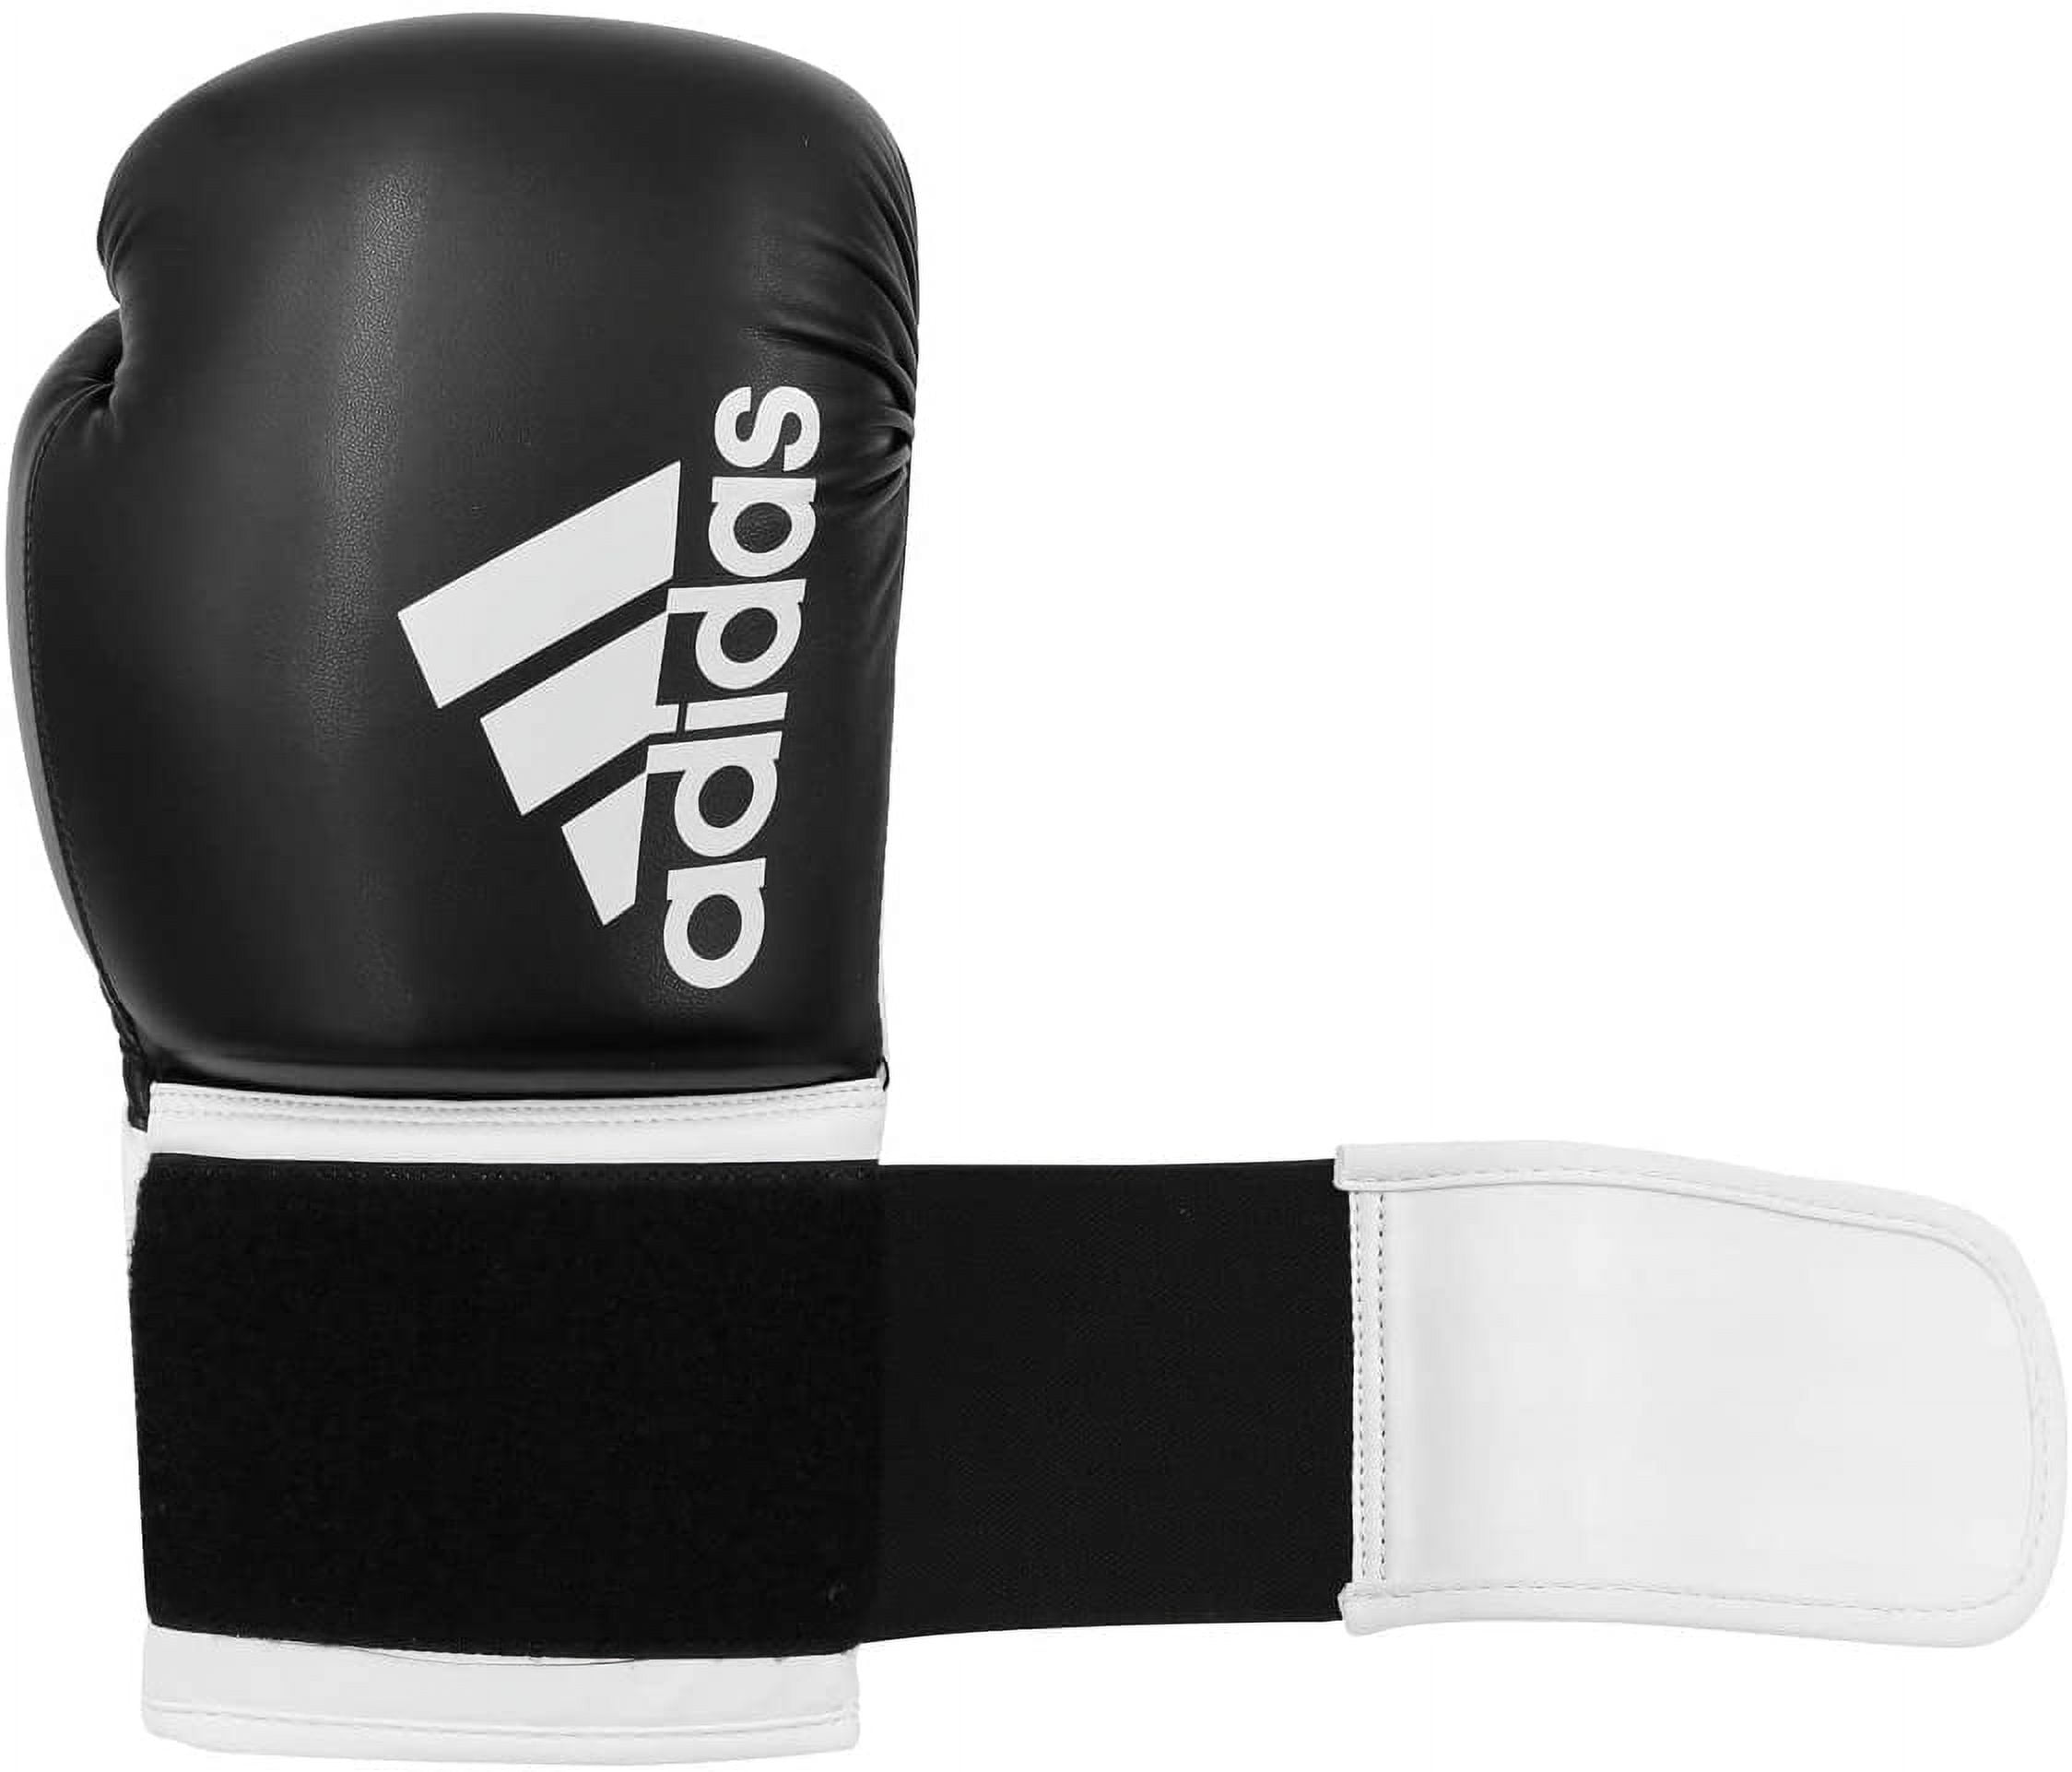 Adidas Boxing - Men Black/White, and 16oz Kickboxing 100 Punching, - Hybrid Women Bags - - for Gloves and Fitness for Heavy and